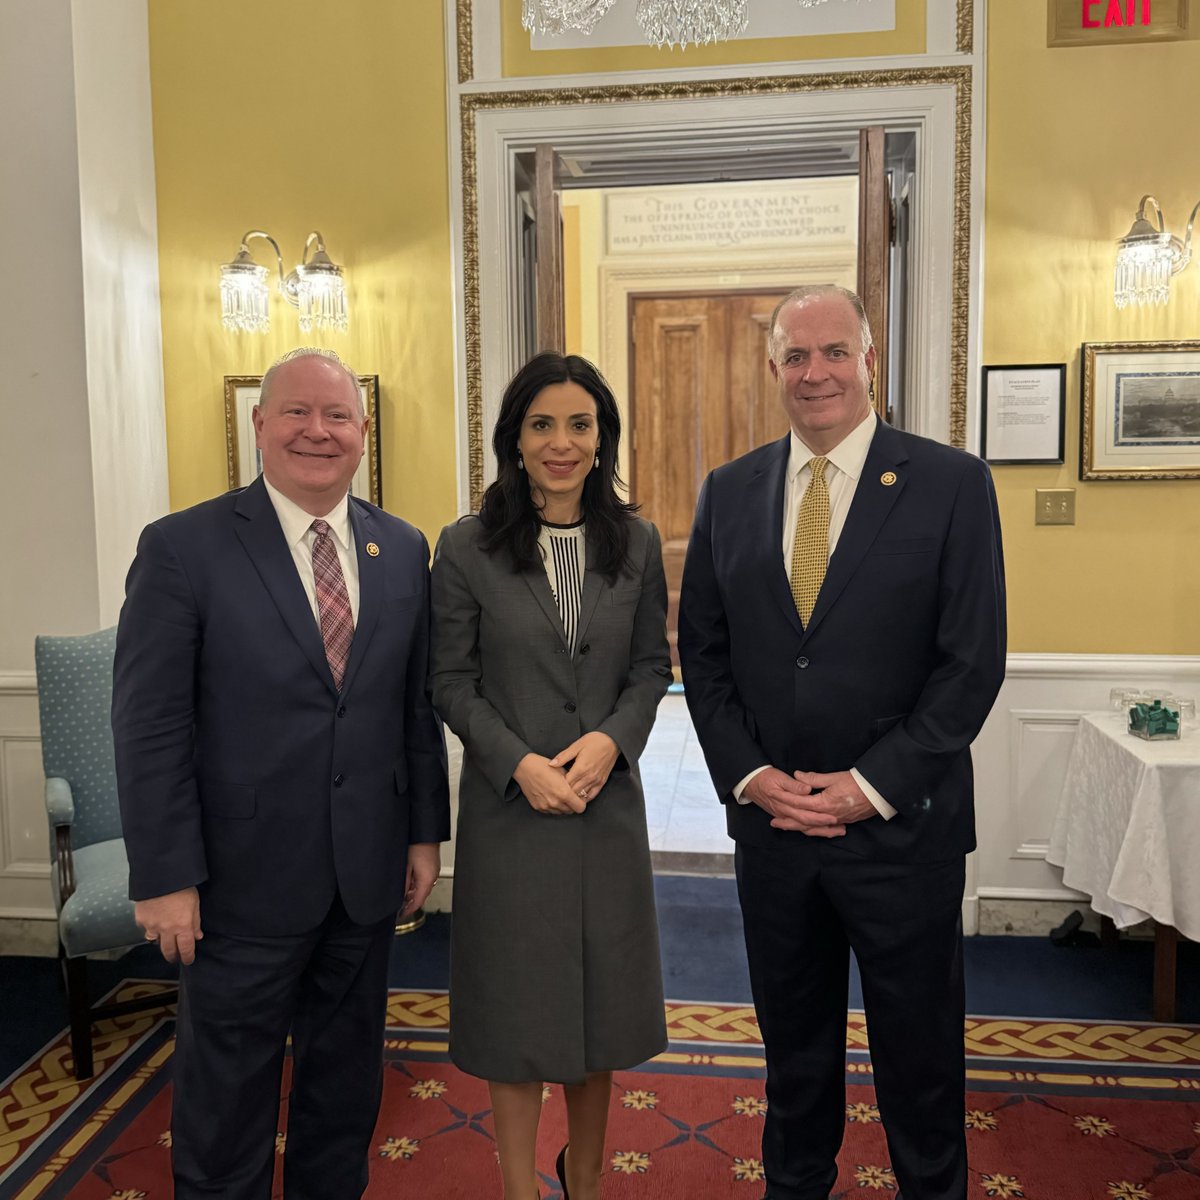 It was an honor to host Liechtenstein Foreign Minister @DominiqueHasler at the U.S. Capitol w/@RepLarryBucshon. We discussed the importance of supporting Ukraine against continued Russian aggression, our common support for democracies, and strengthening economic ties.